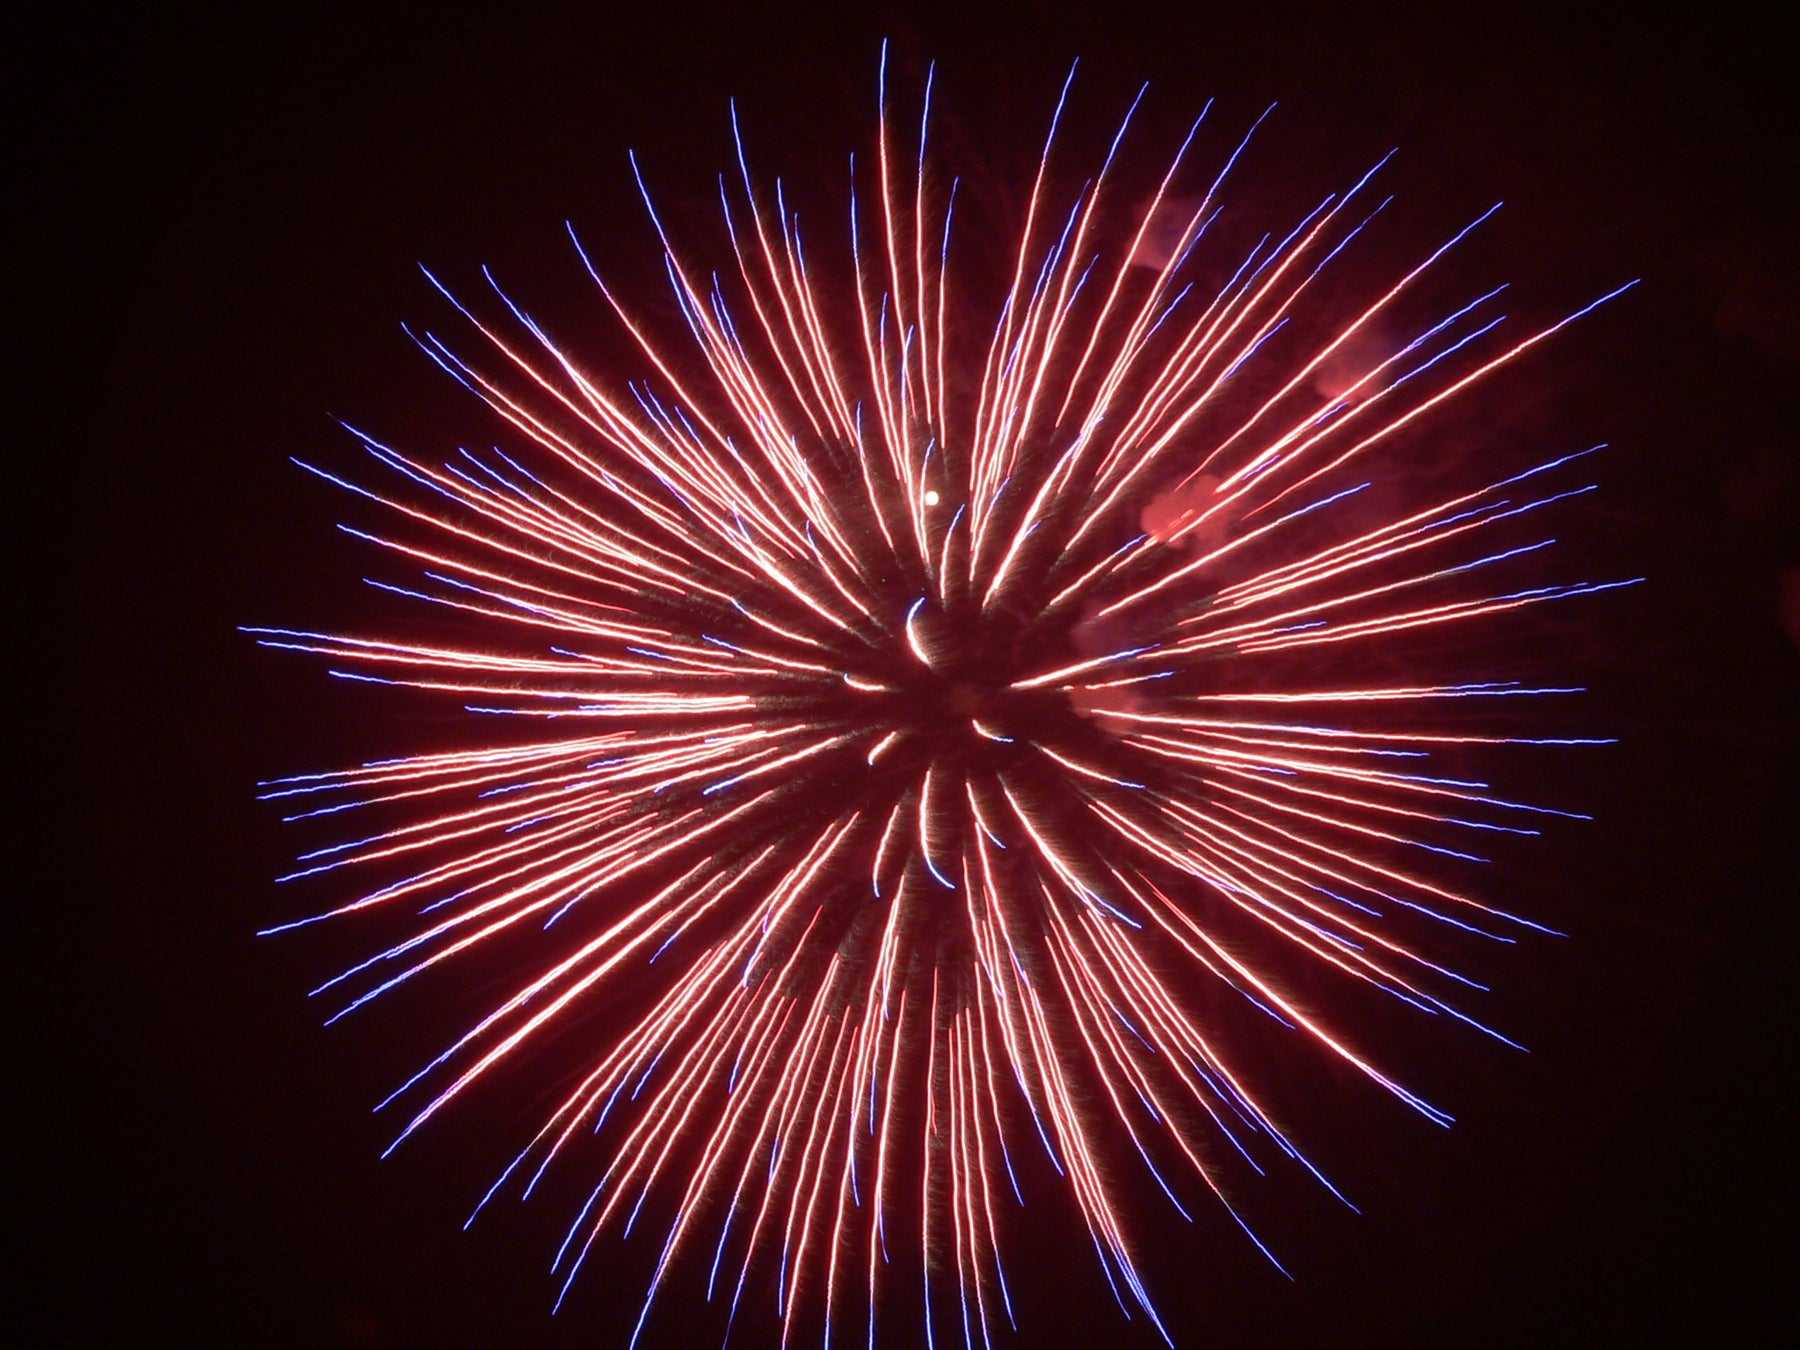 COMMONPLACE FIREWORK MISCONCEPTIONS